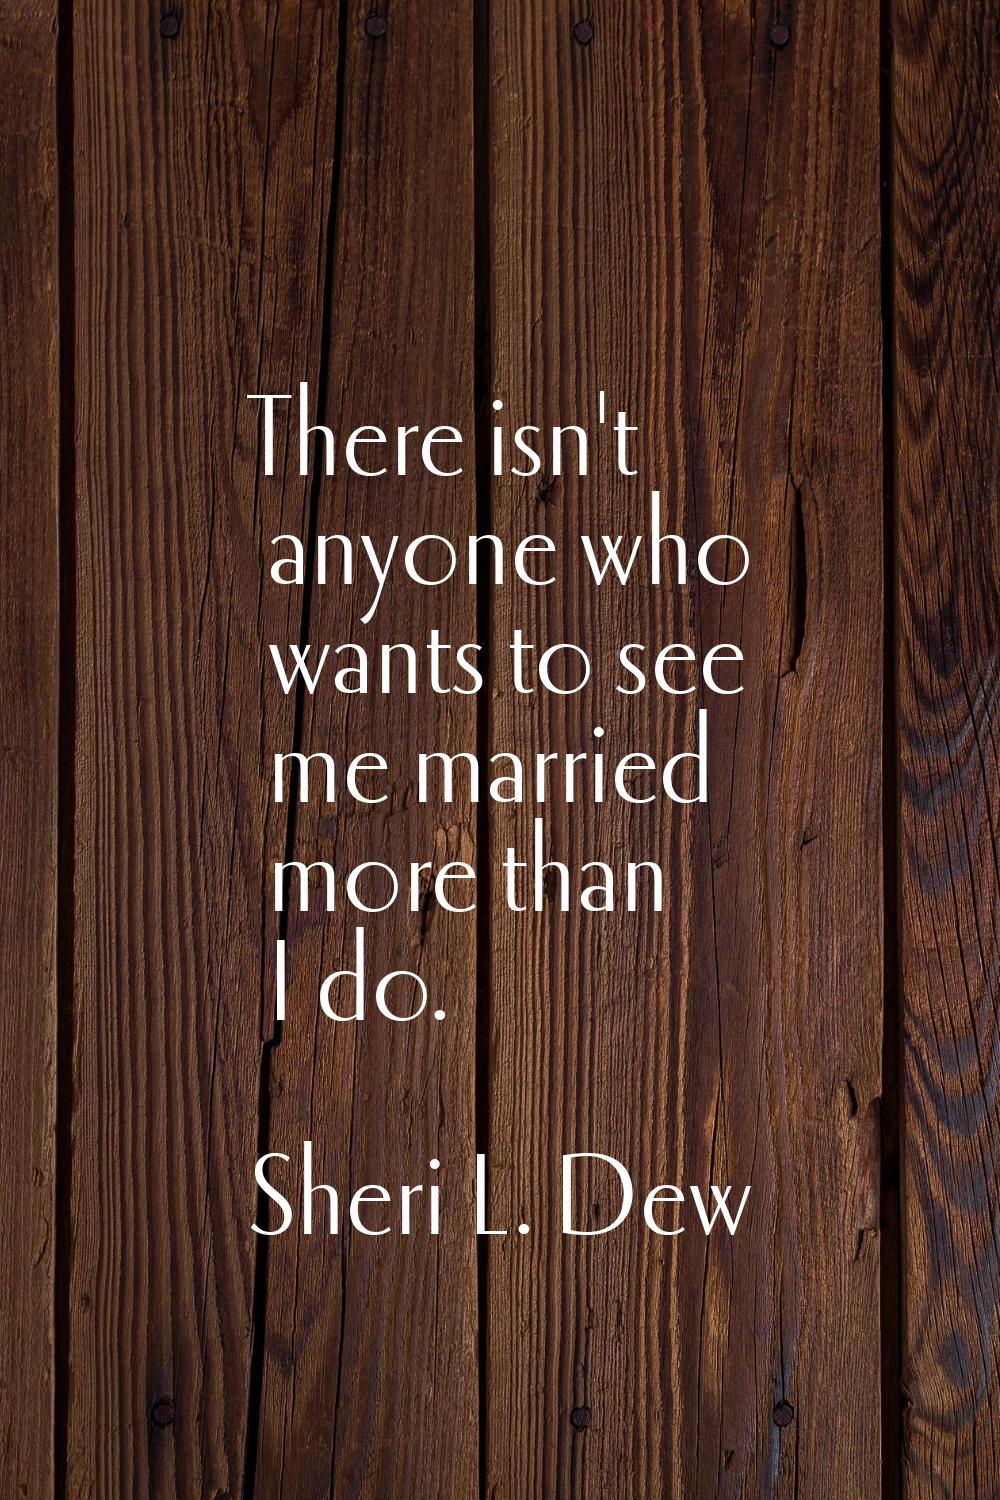 There isn't anyone who wants to see me married more than I do.